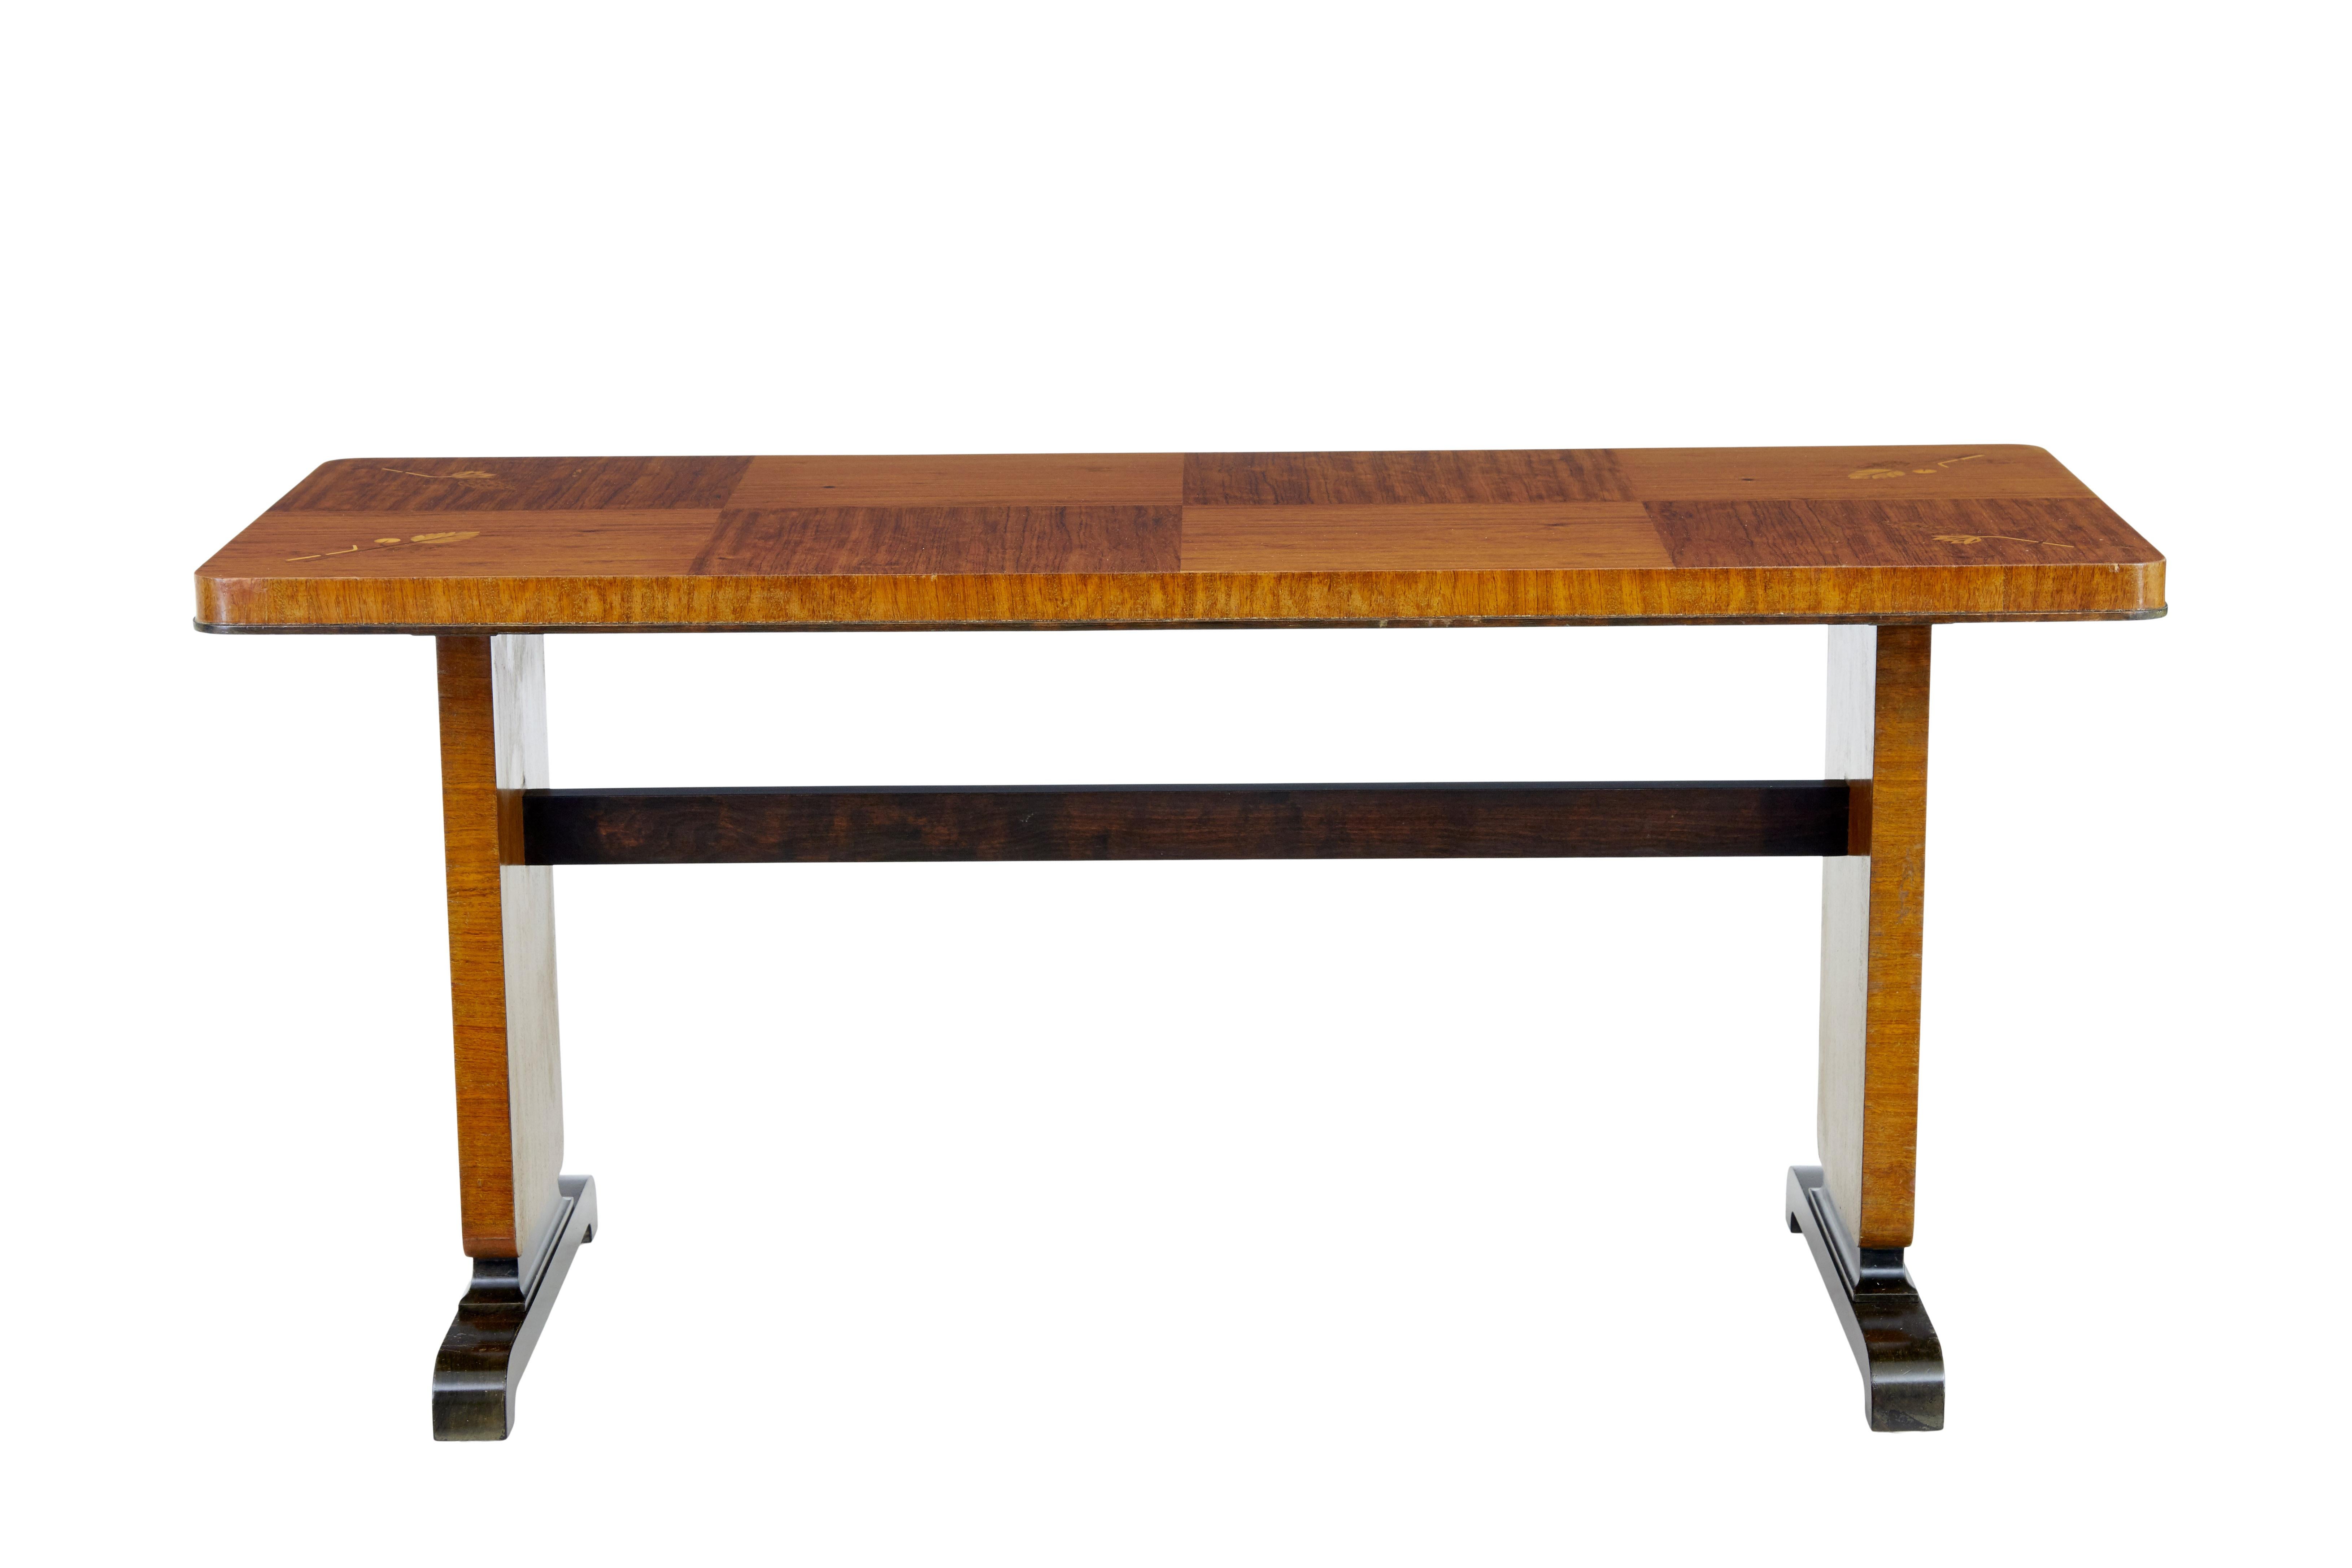 Mid 20th century inlaid birch coffee table circa 1950.

Coffee / occasional table.  A little bit of an unusual height makes this more suited to a sofa / side table.

Rectangular top with rounded edges, made from 8 arranged squares of veneer, 4 of